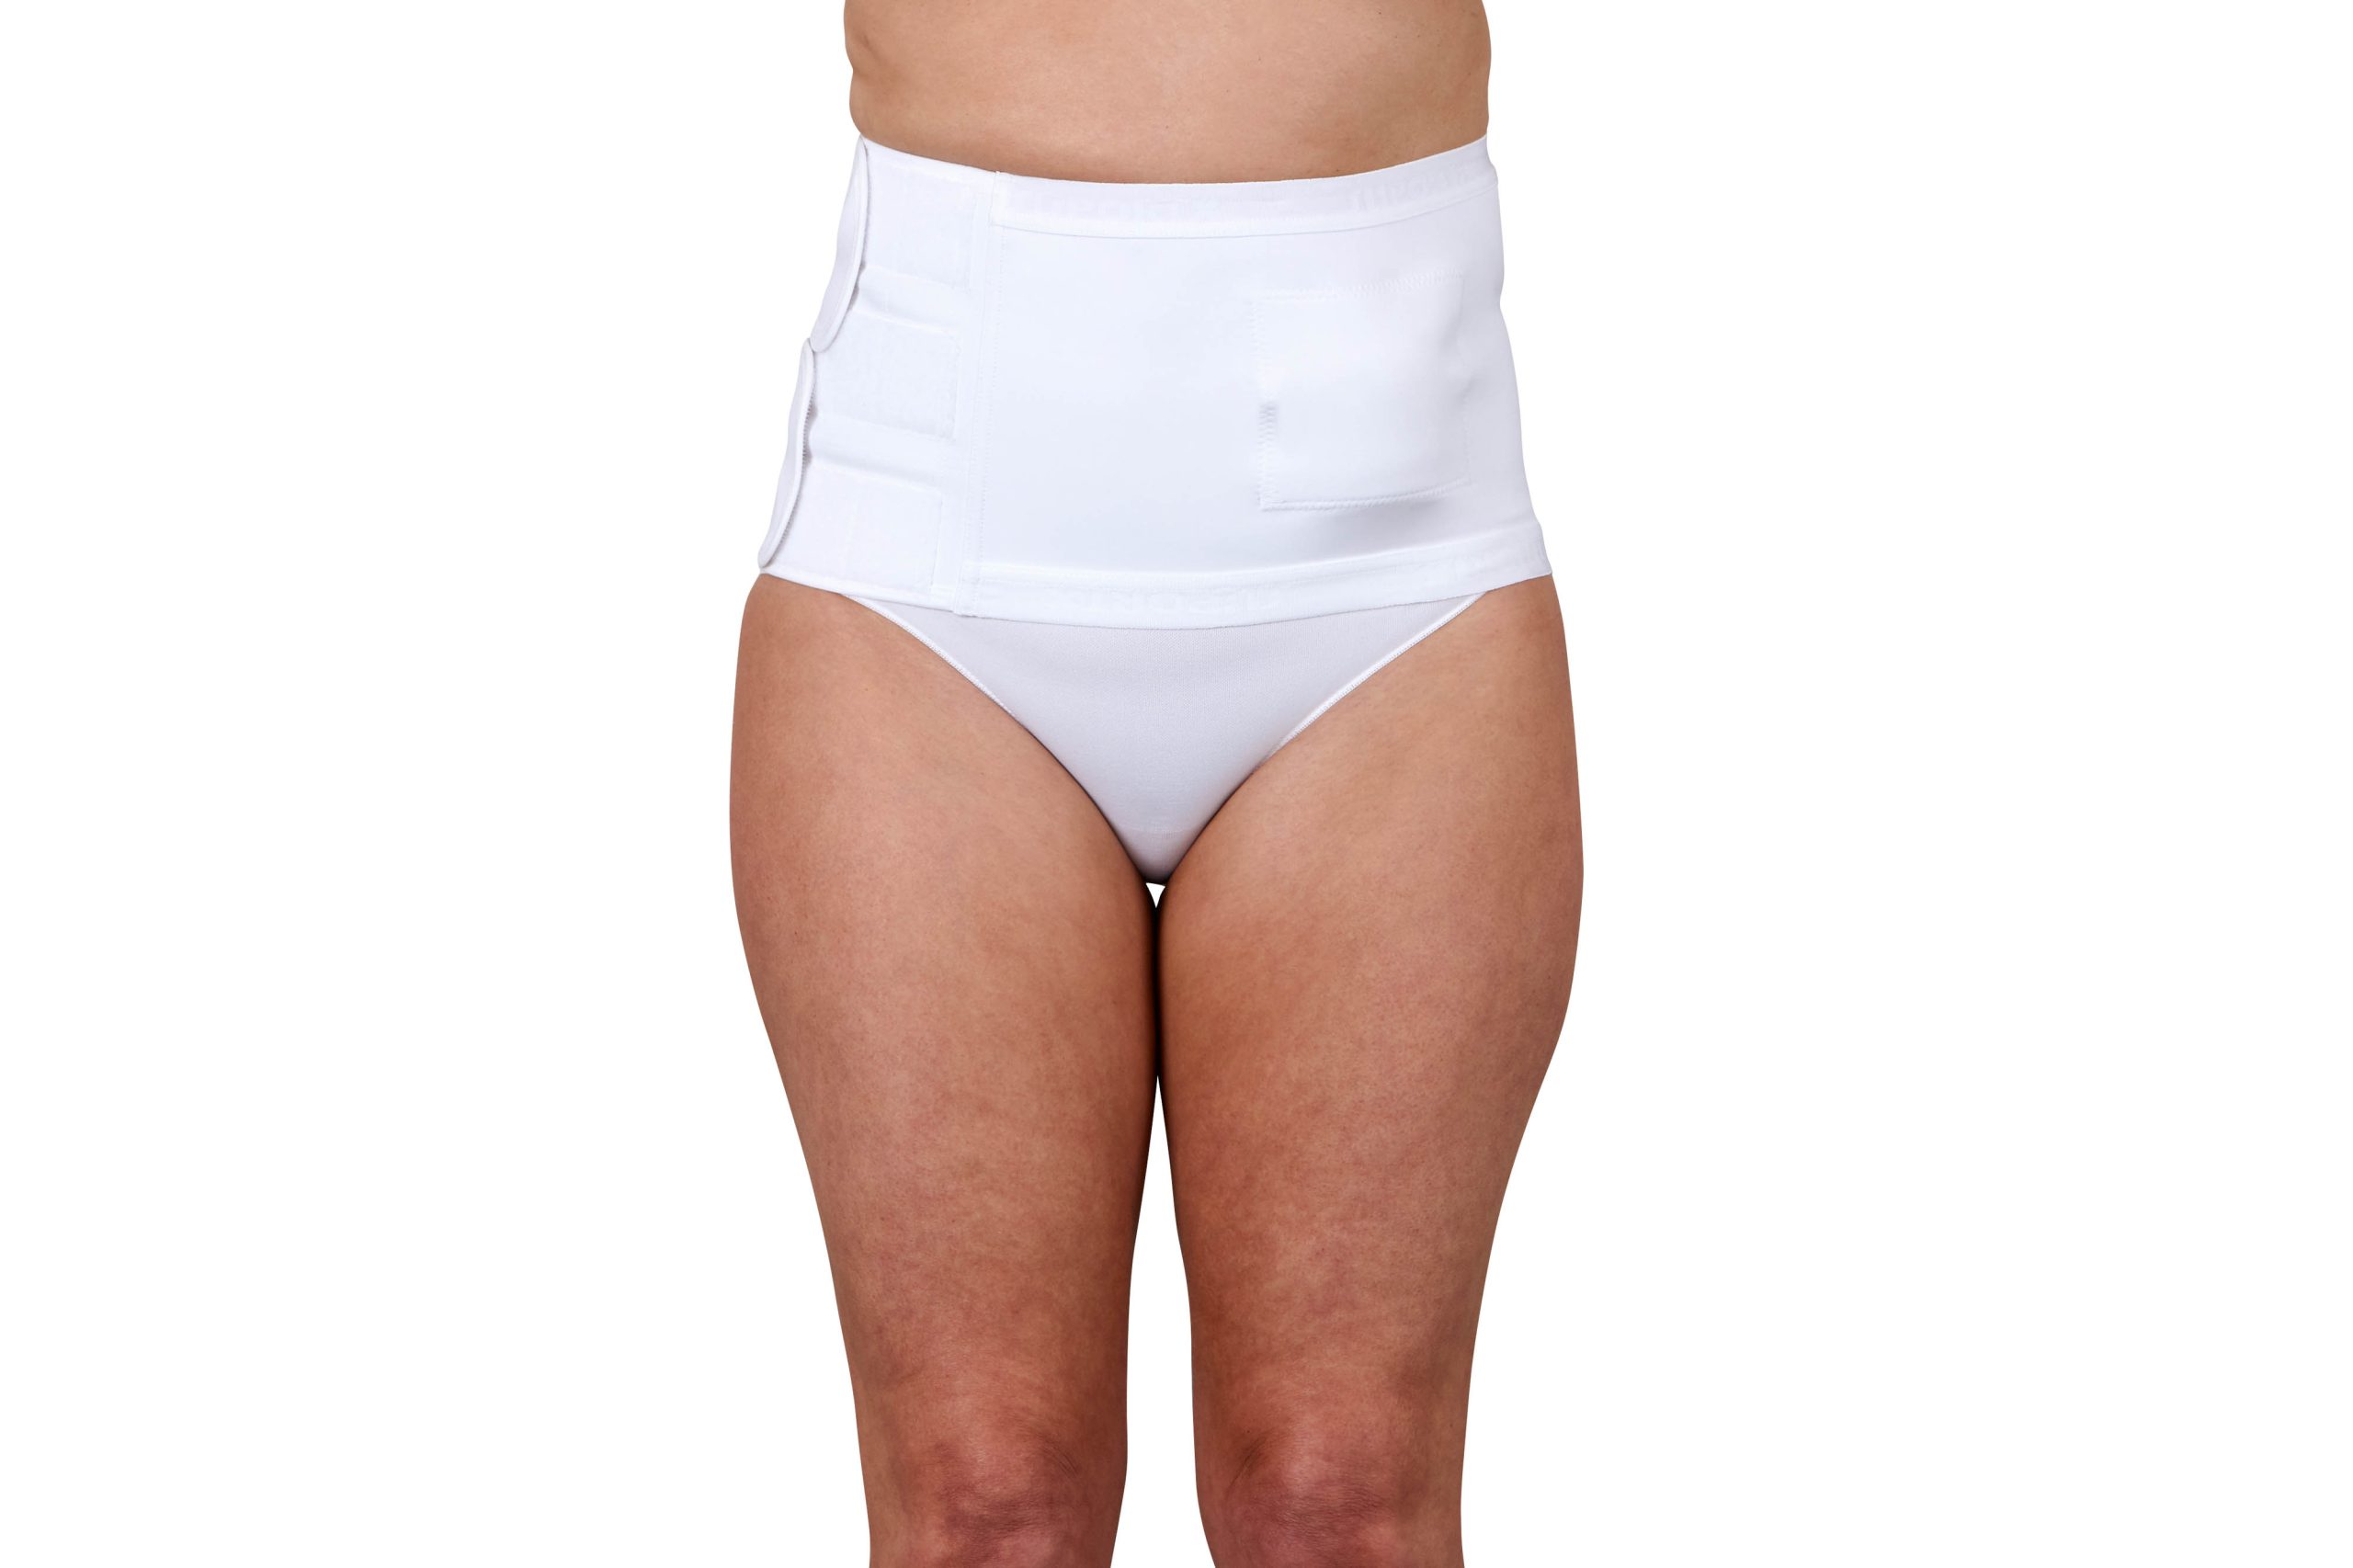 SUPORTX Stoma Shield Belt with Easy Peel Fastener - Sutherland Medical